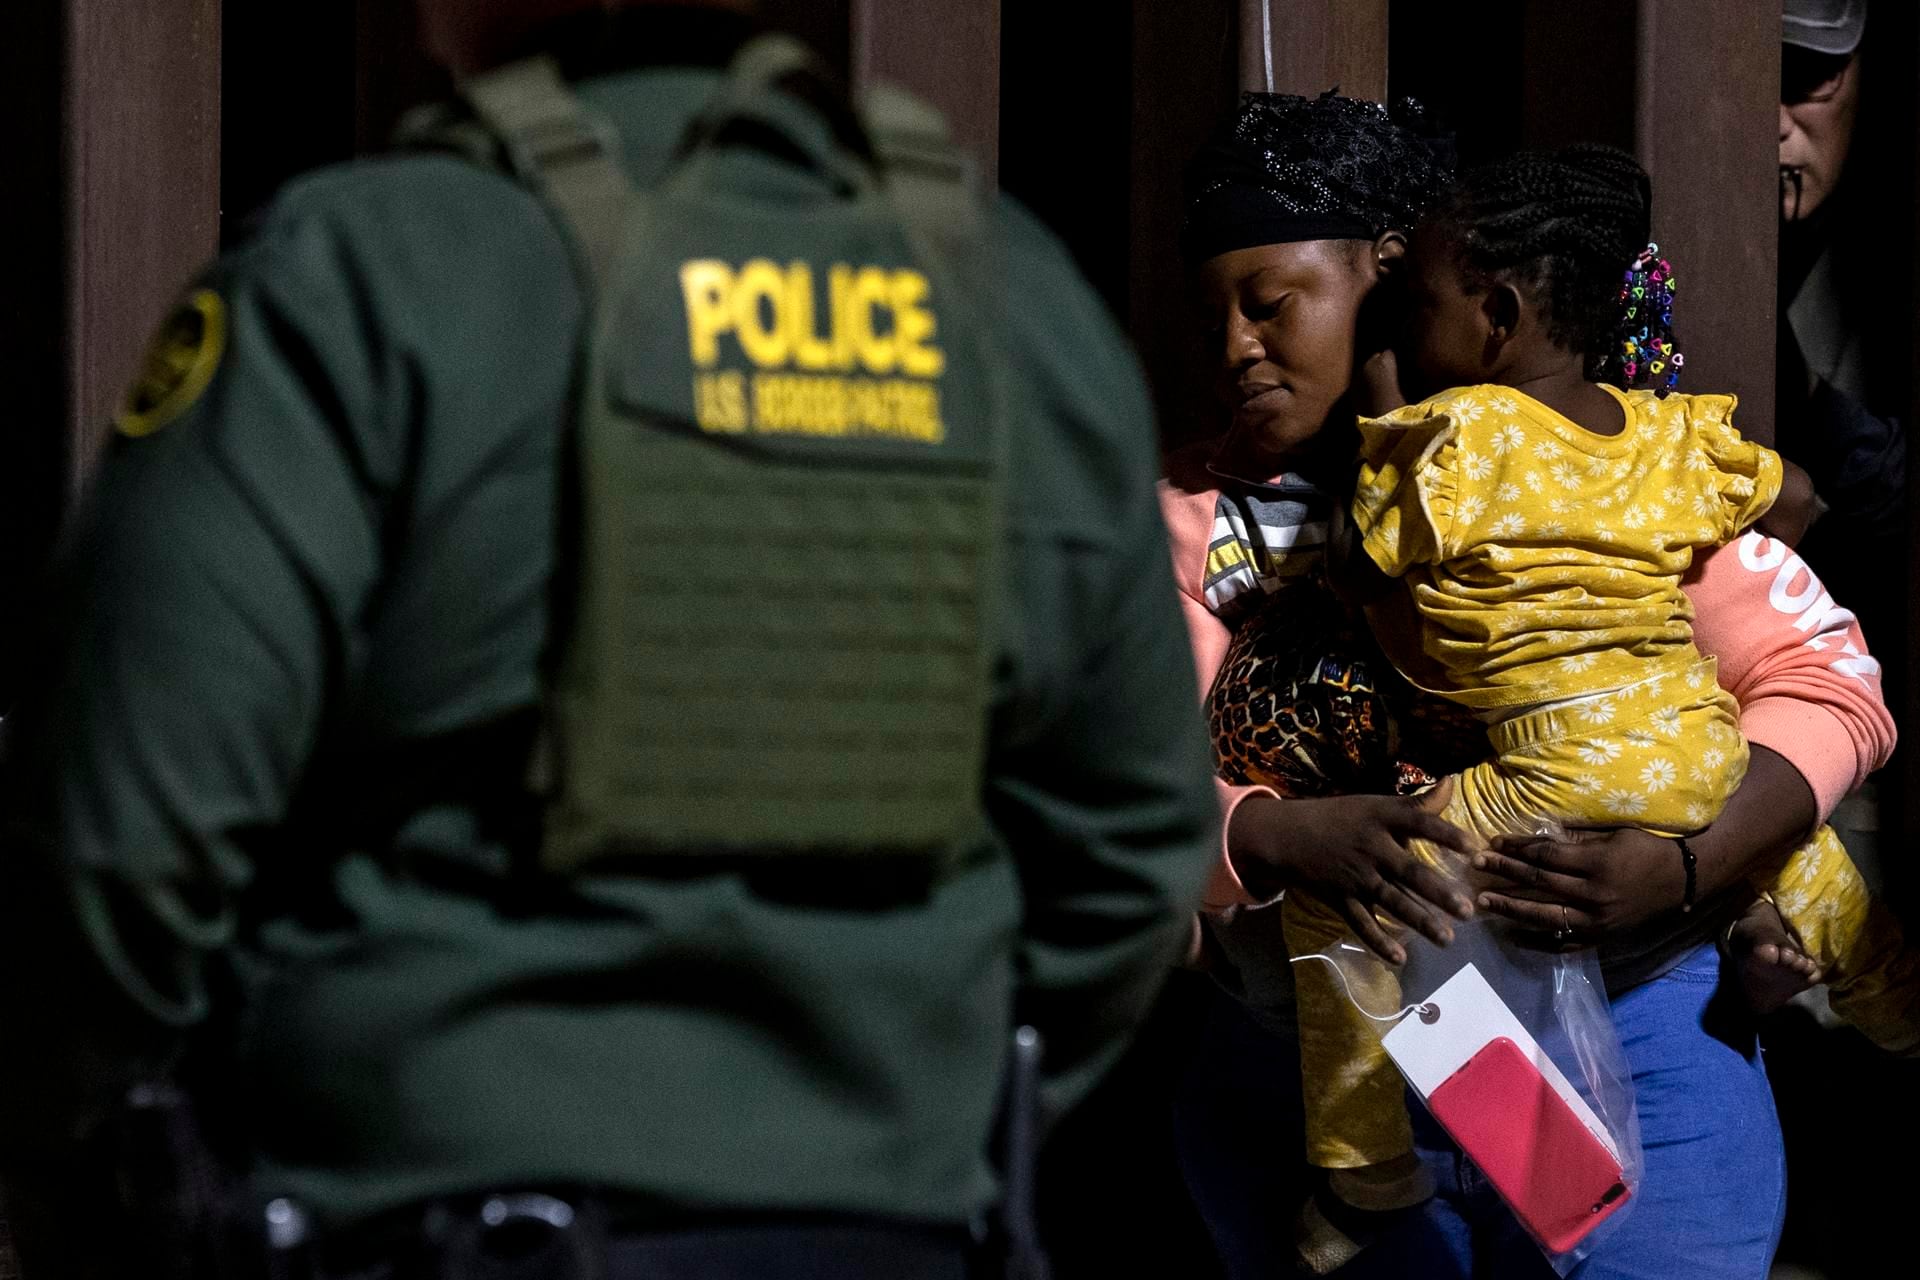 A family of Ghanaian migrants waits for Border Patrol agents to process them after crossing into the US illegally in Yuma, Arizona.  (EFE/EPA/ETIENNE LAURENT).